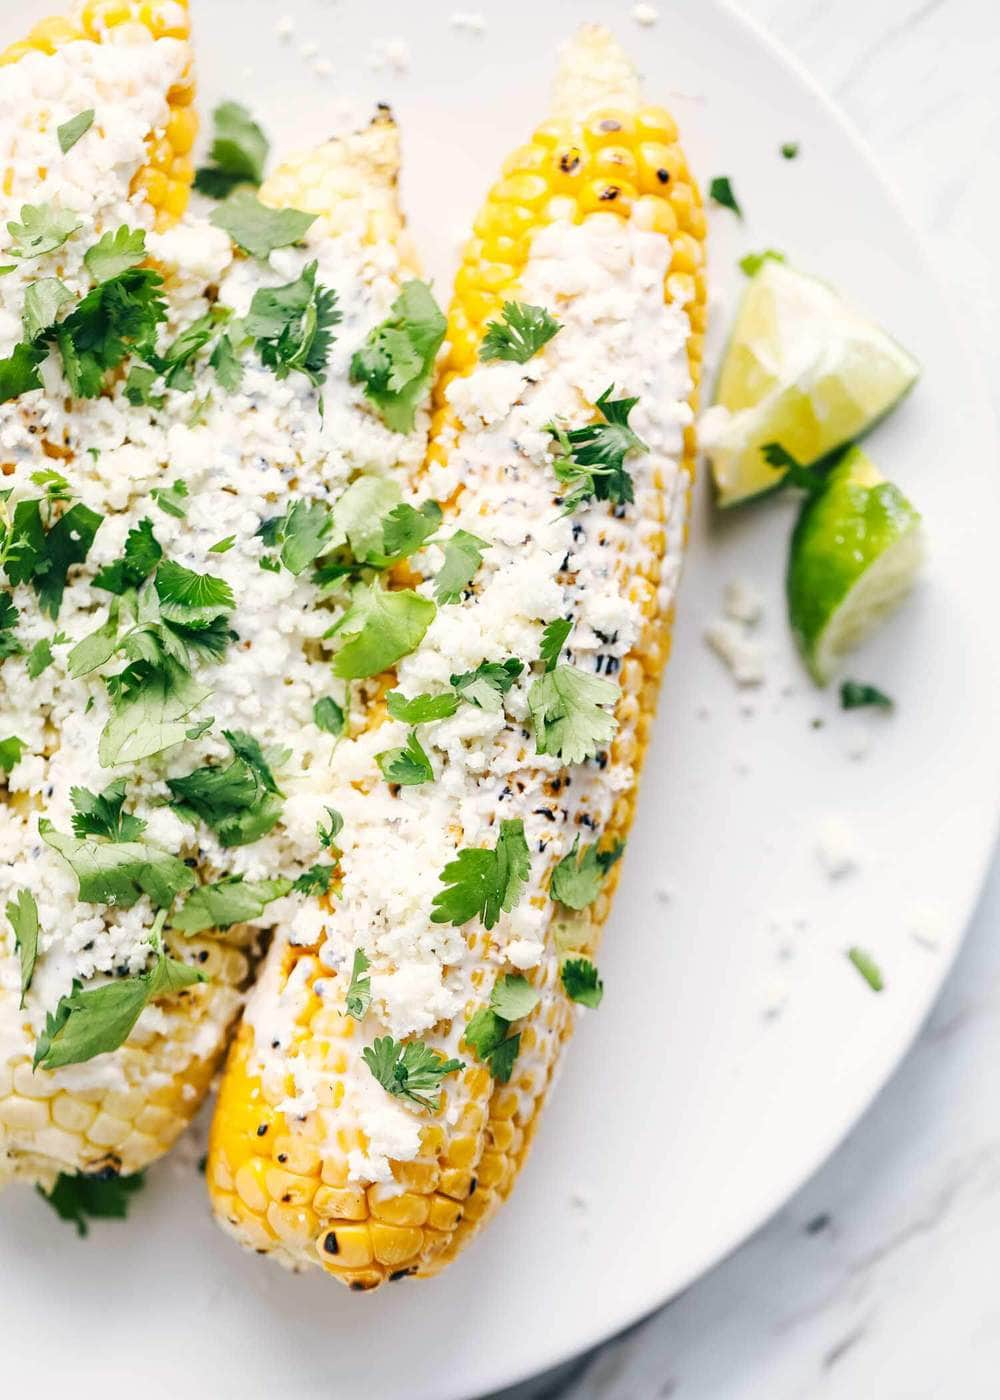 Mexican street corn on white plate.